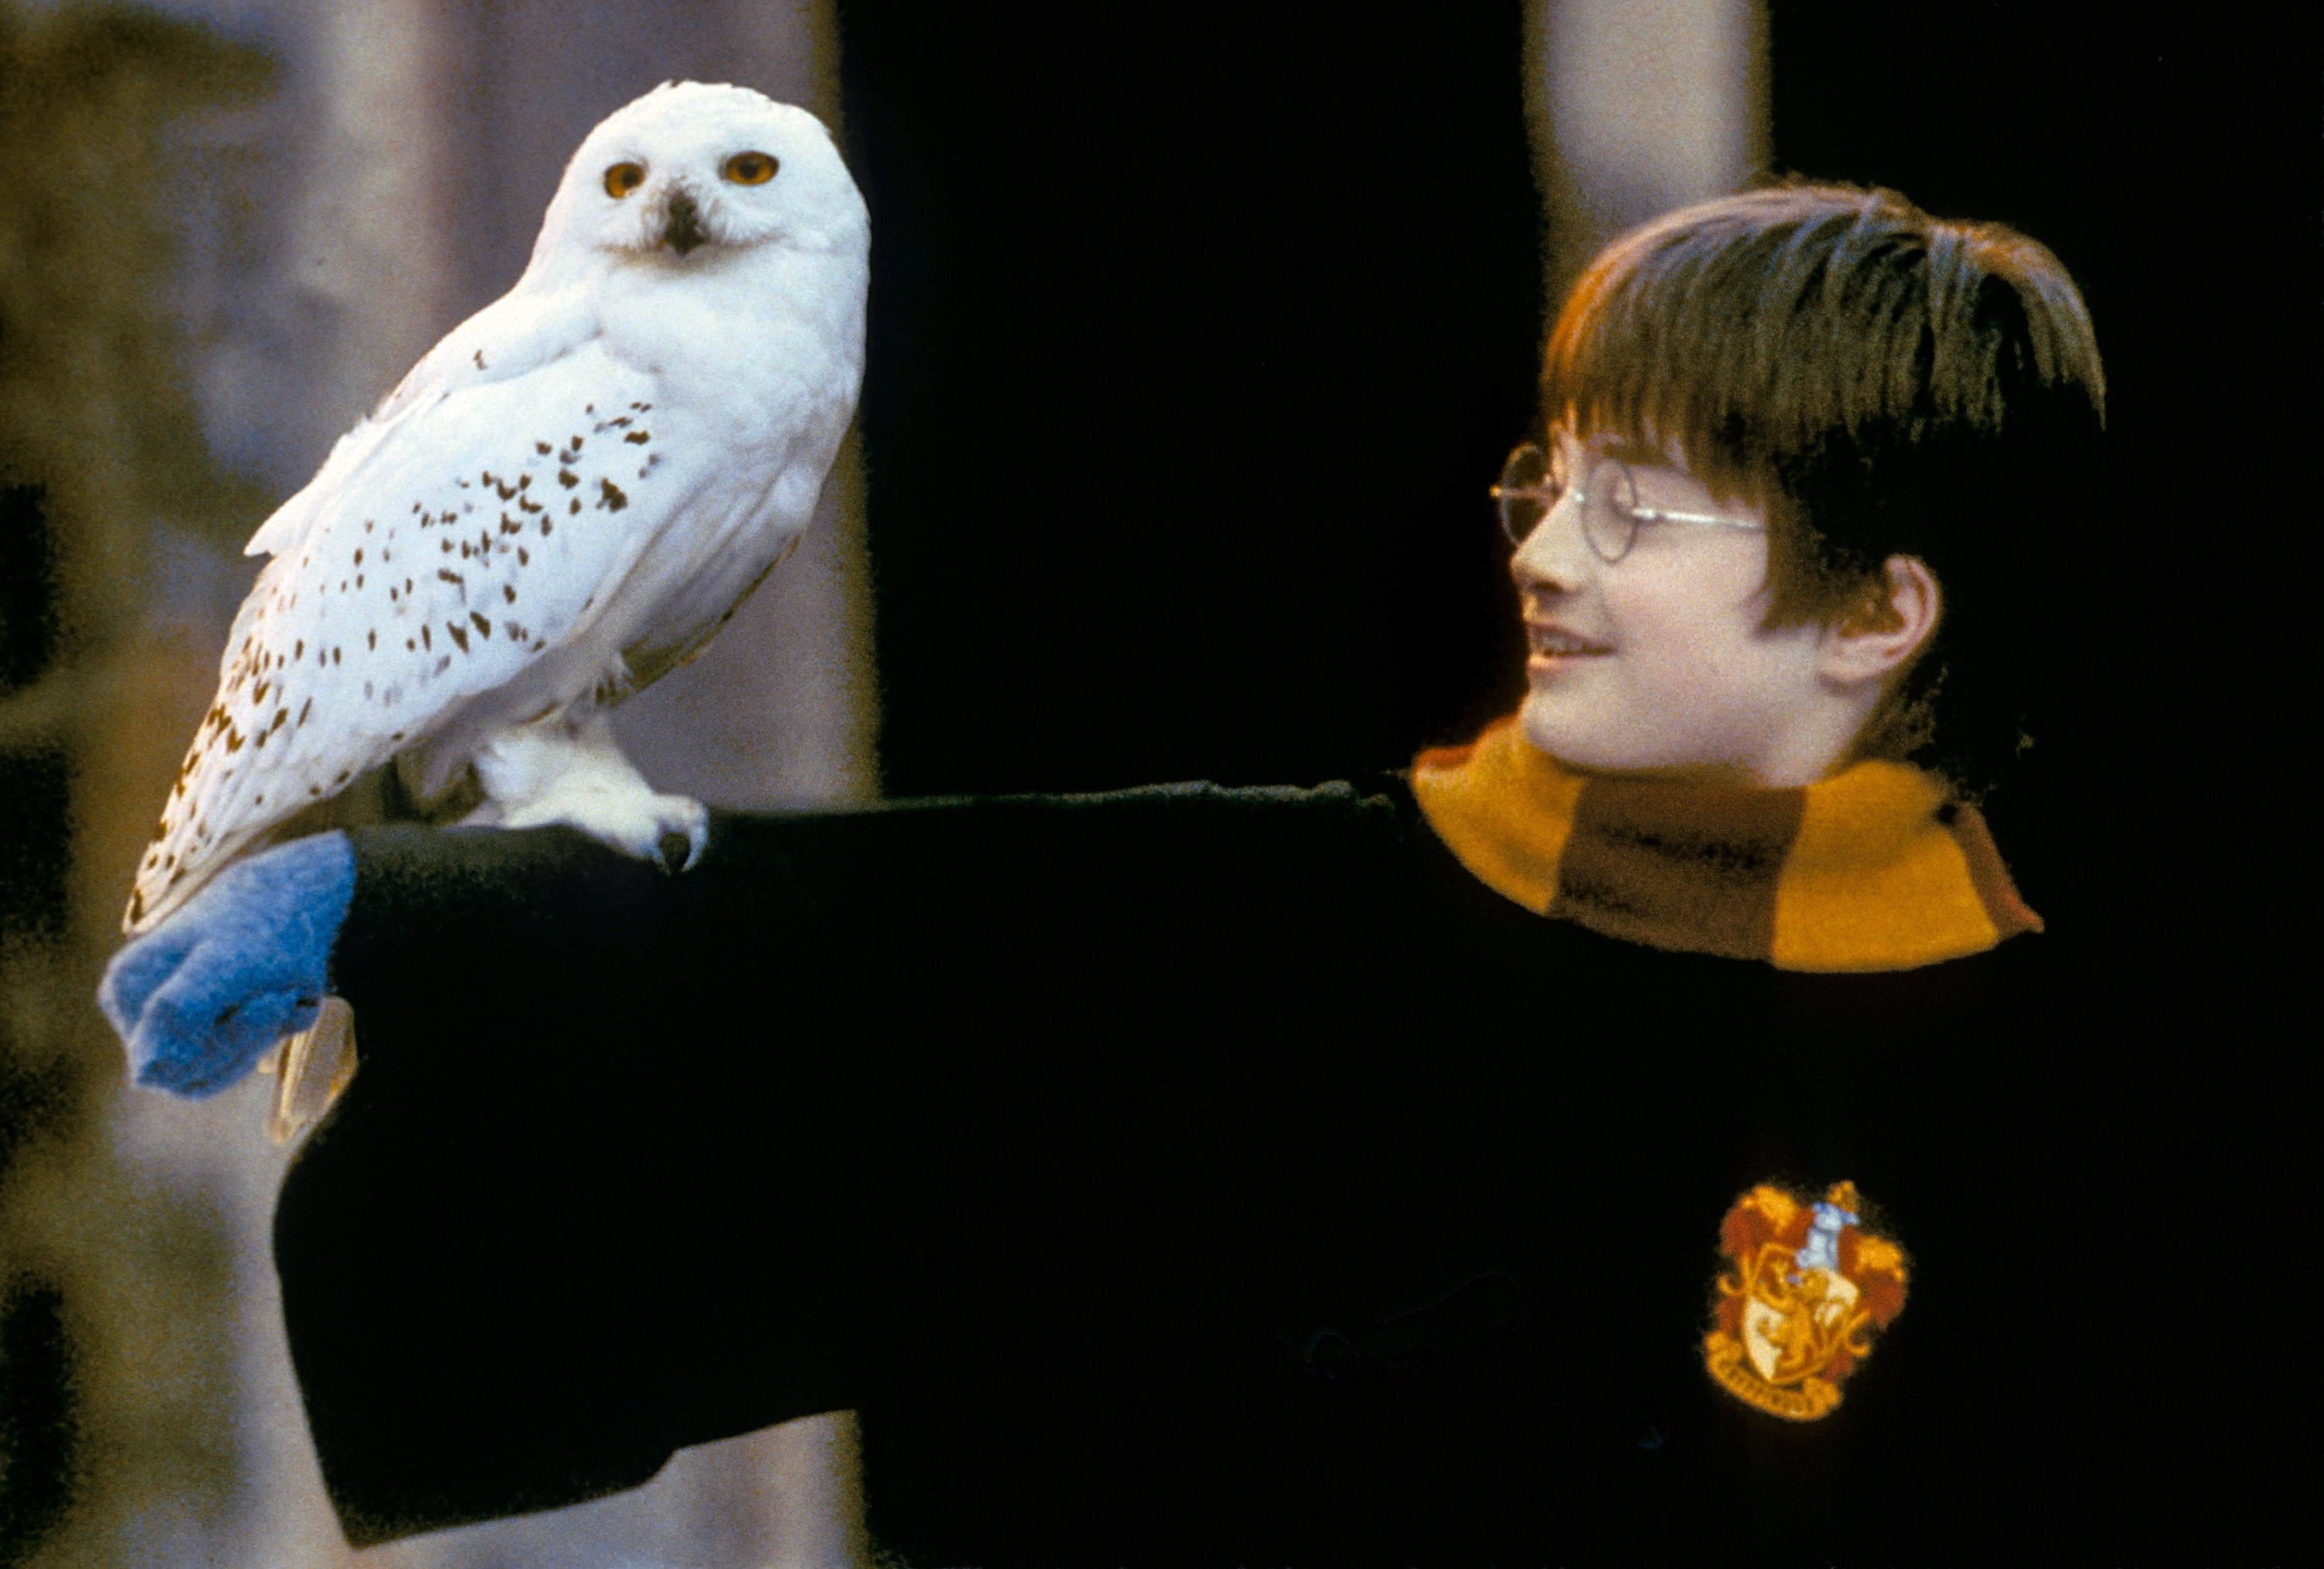 A young boy has an owl perched on his arm